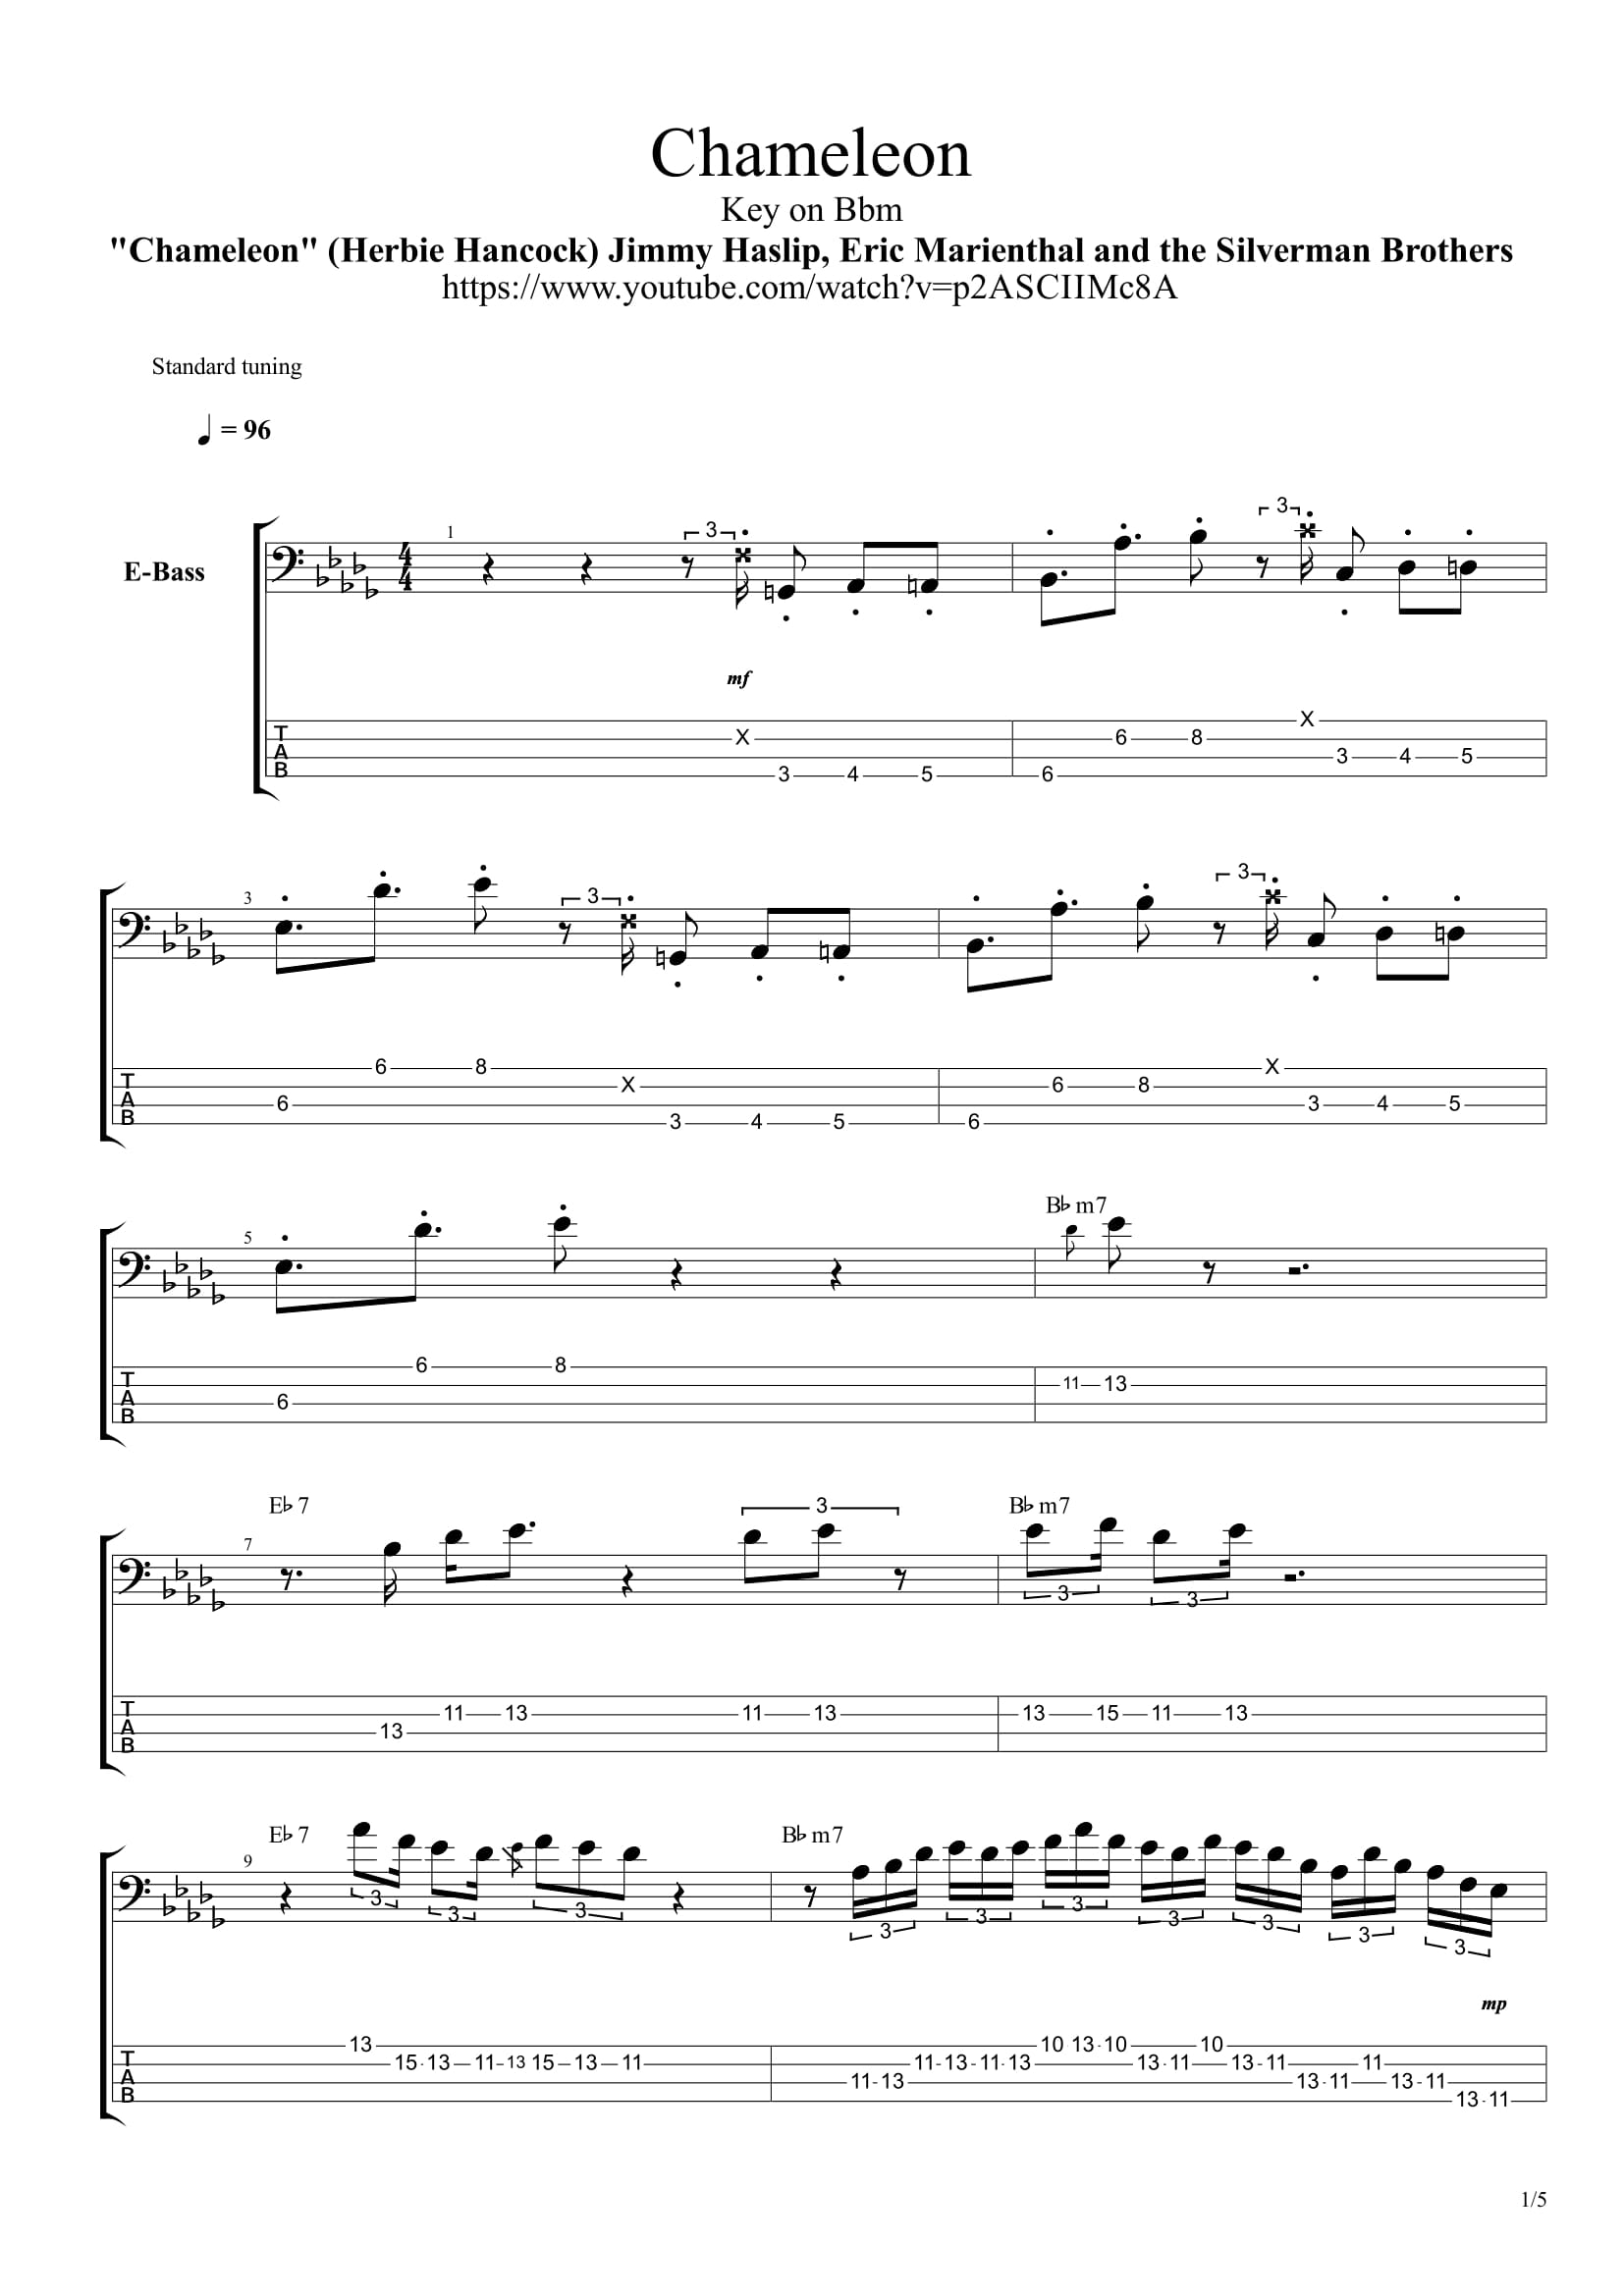 Chameleon - Jimmy Haslip's Bass Solo (Original song by Herbie Hancock) [베이스  악보 / Bass Tab Score]